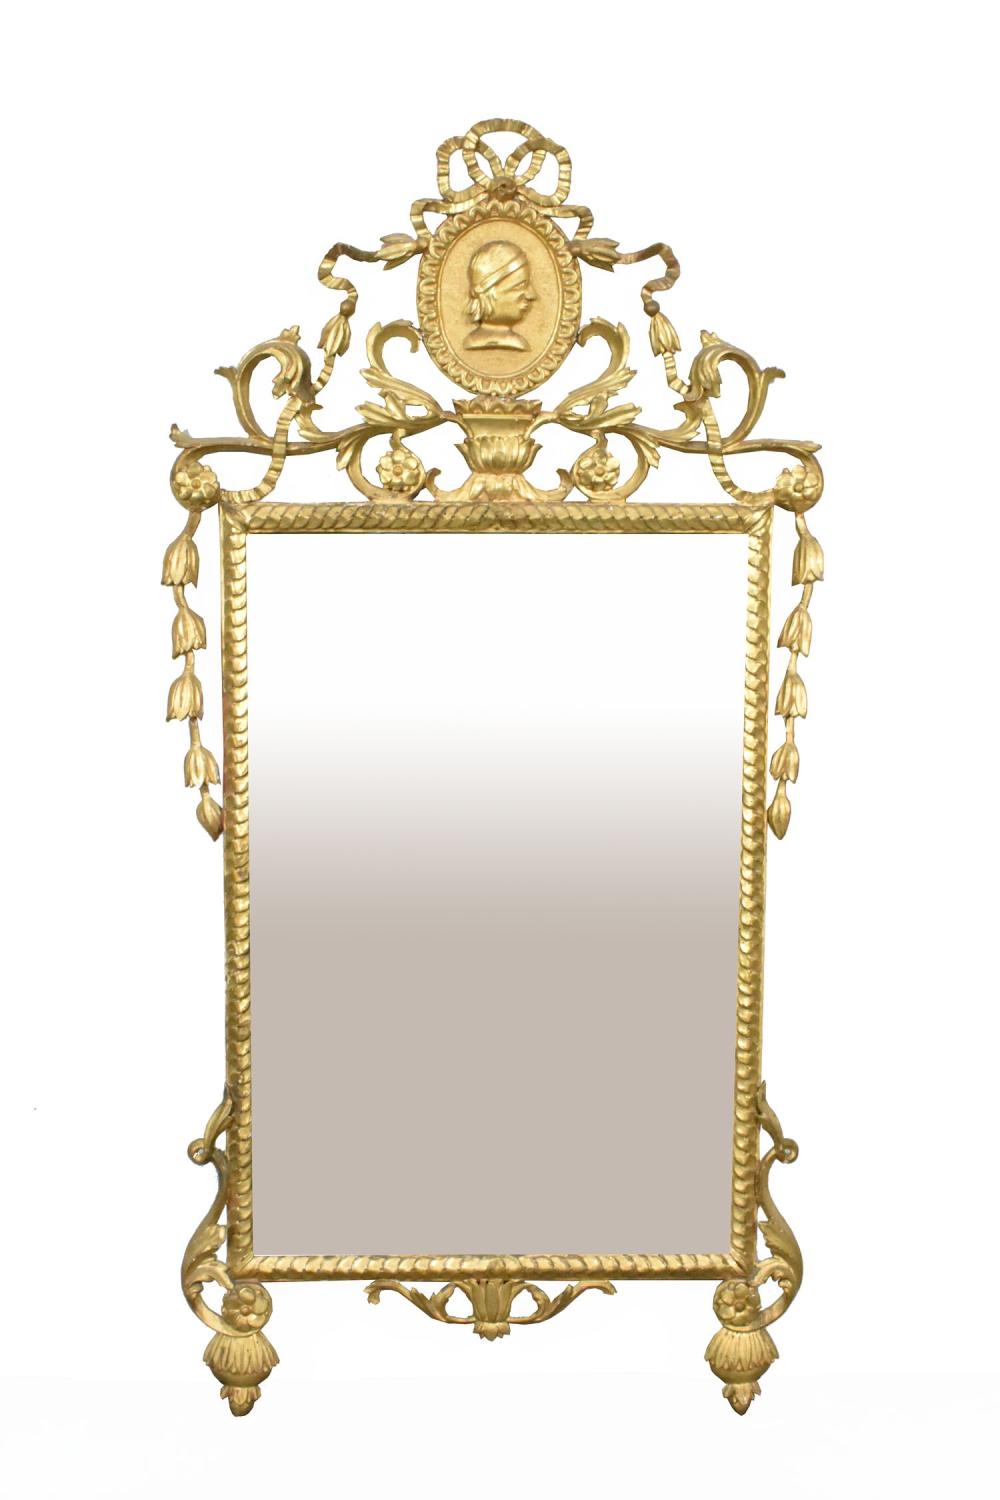 ANTIQUE GILTWOOD CARVED MIRROR,